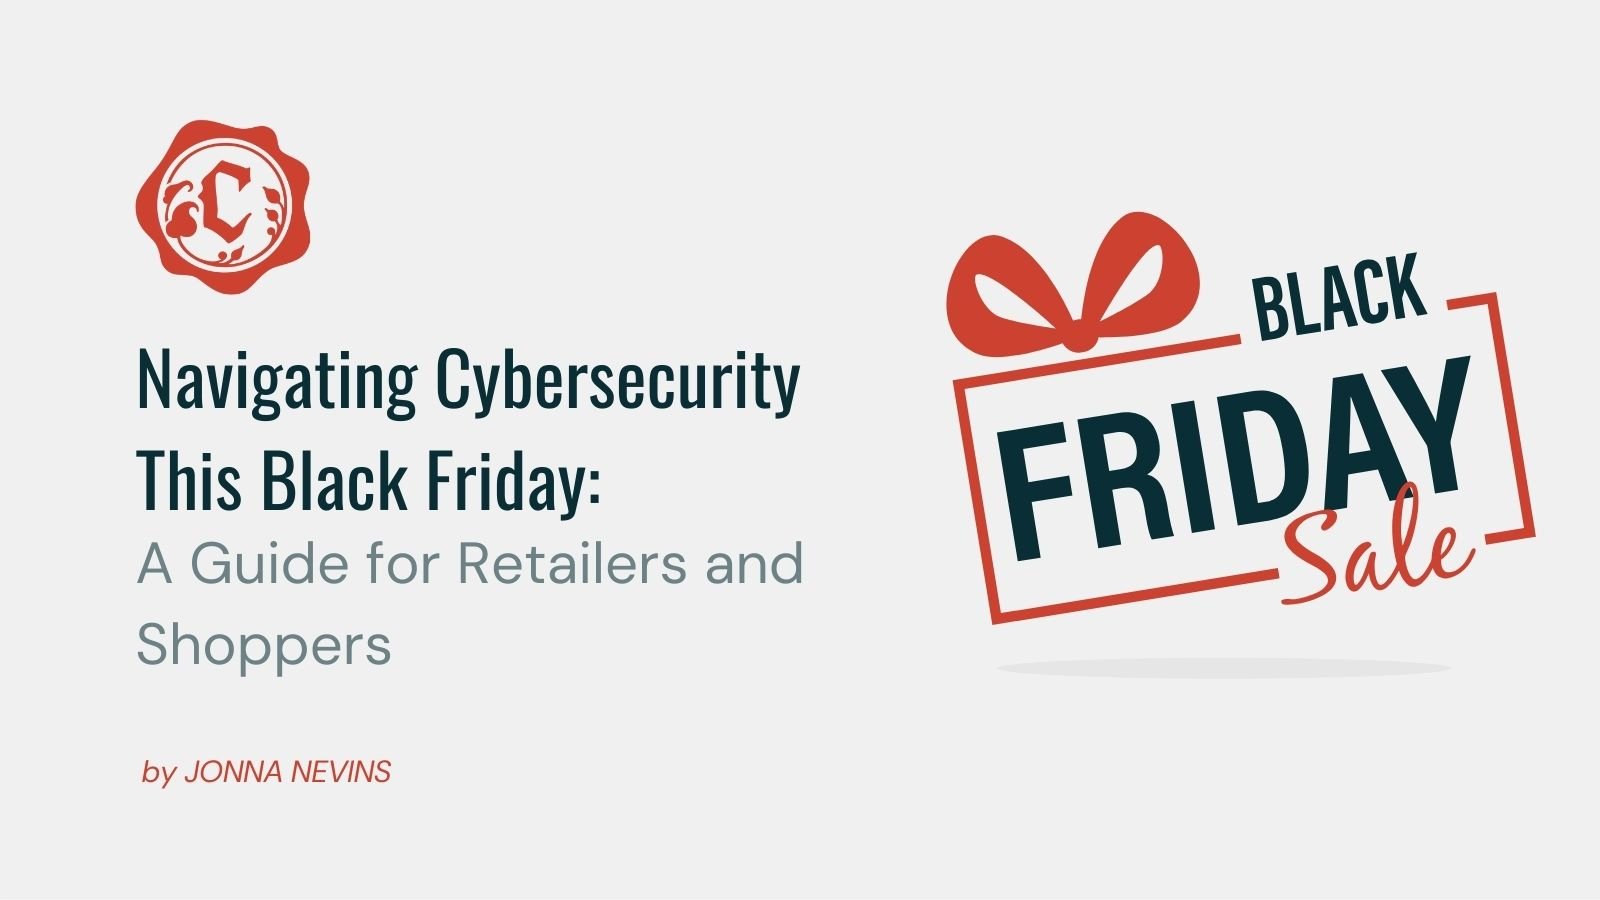 Navigating Cybersecurity This Black Friday: A Guide for Retailers and Shoppers